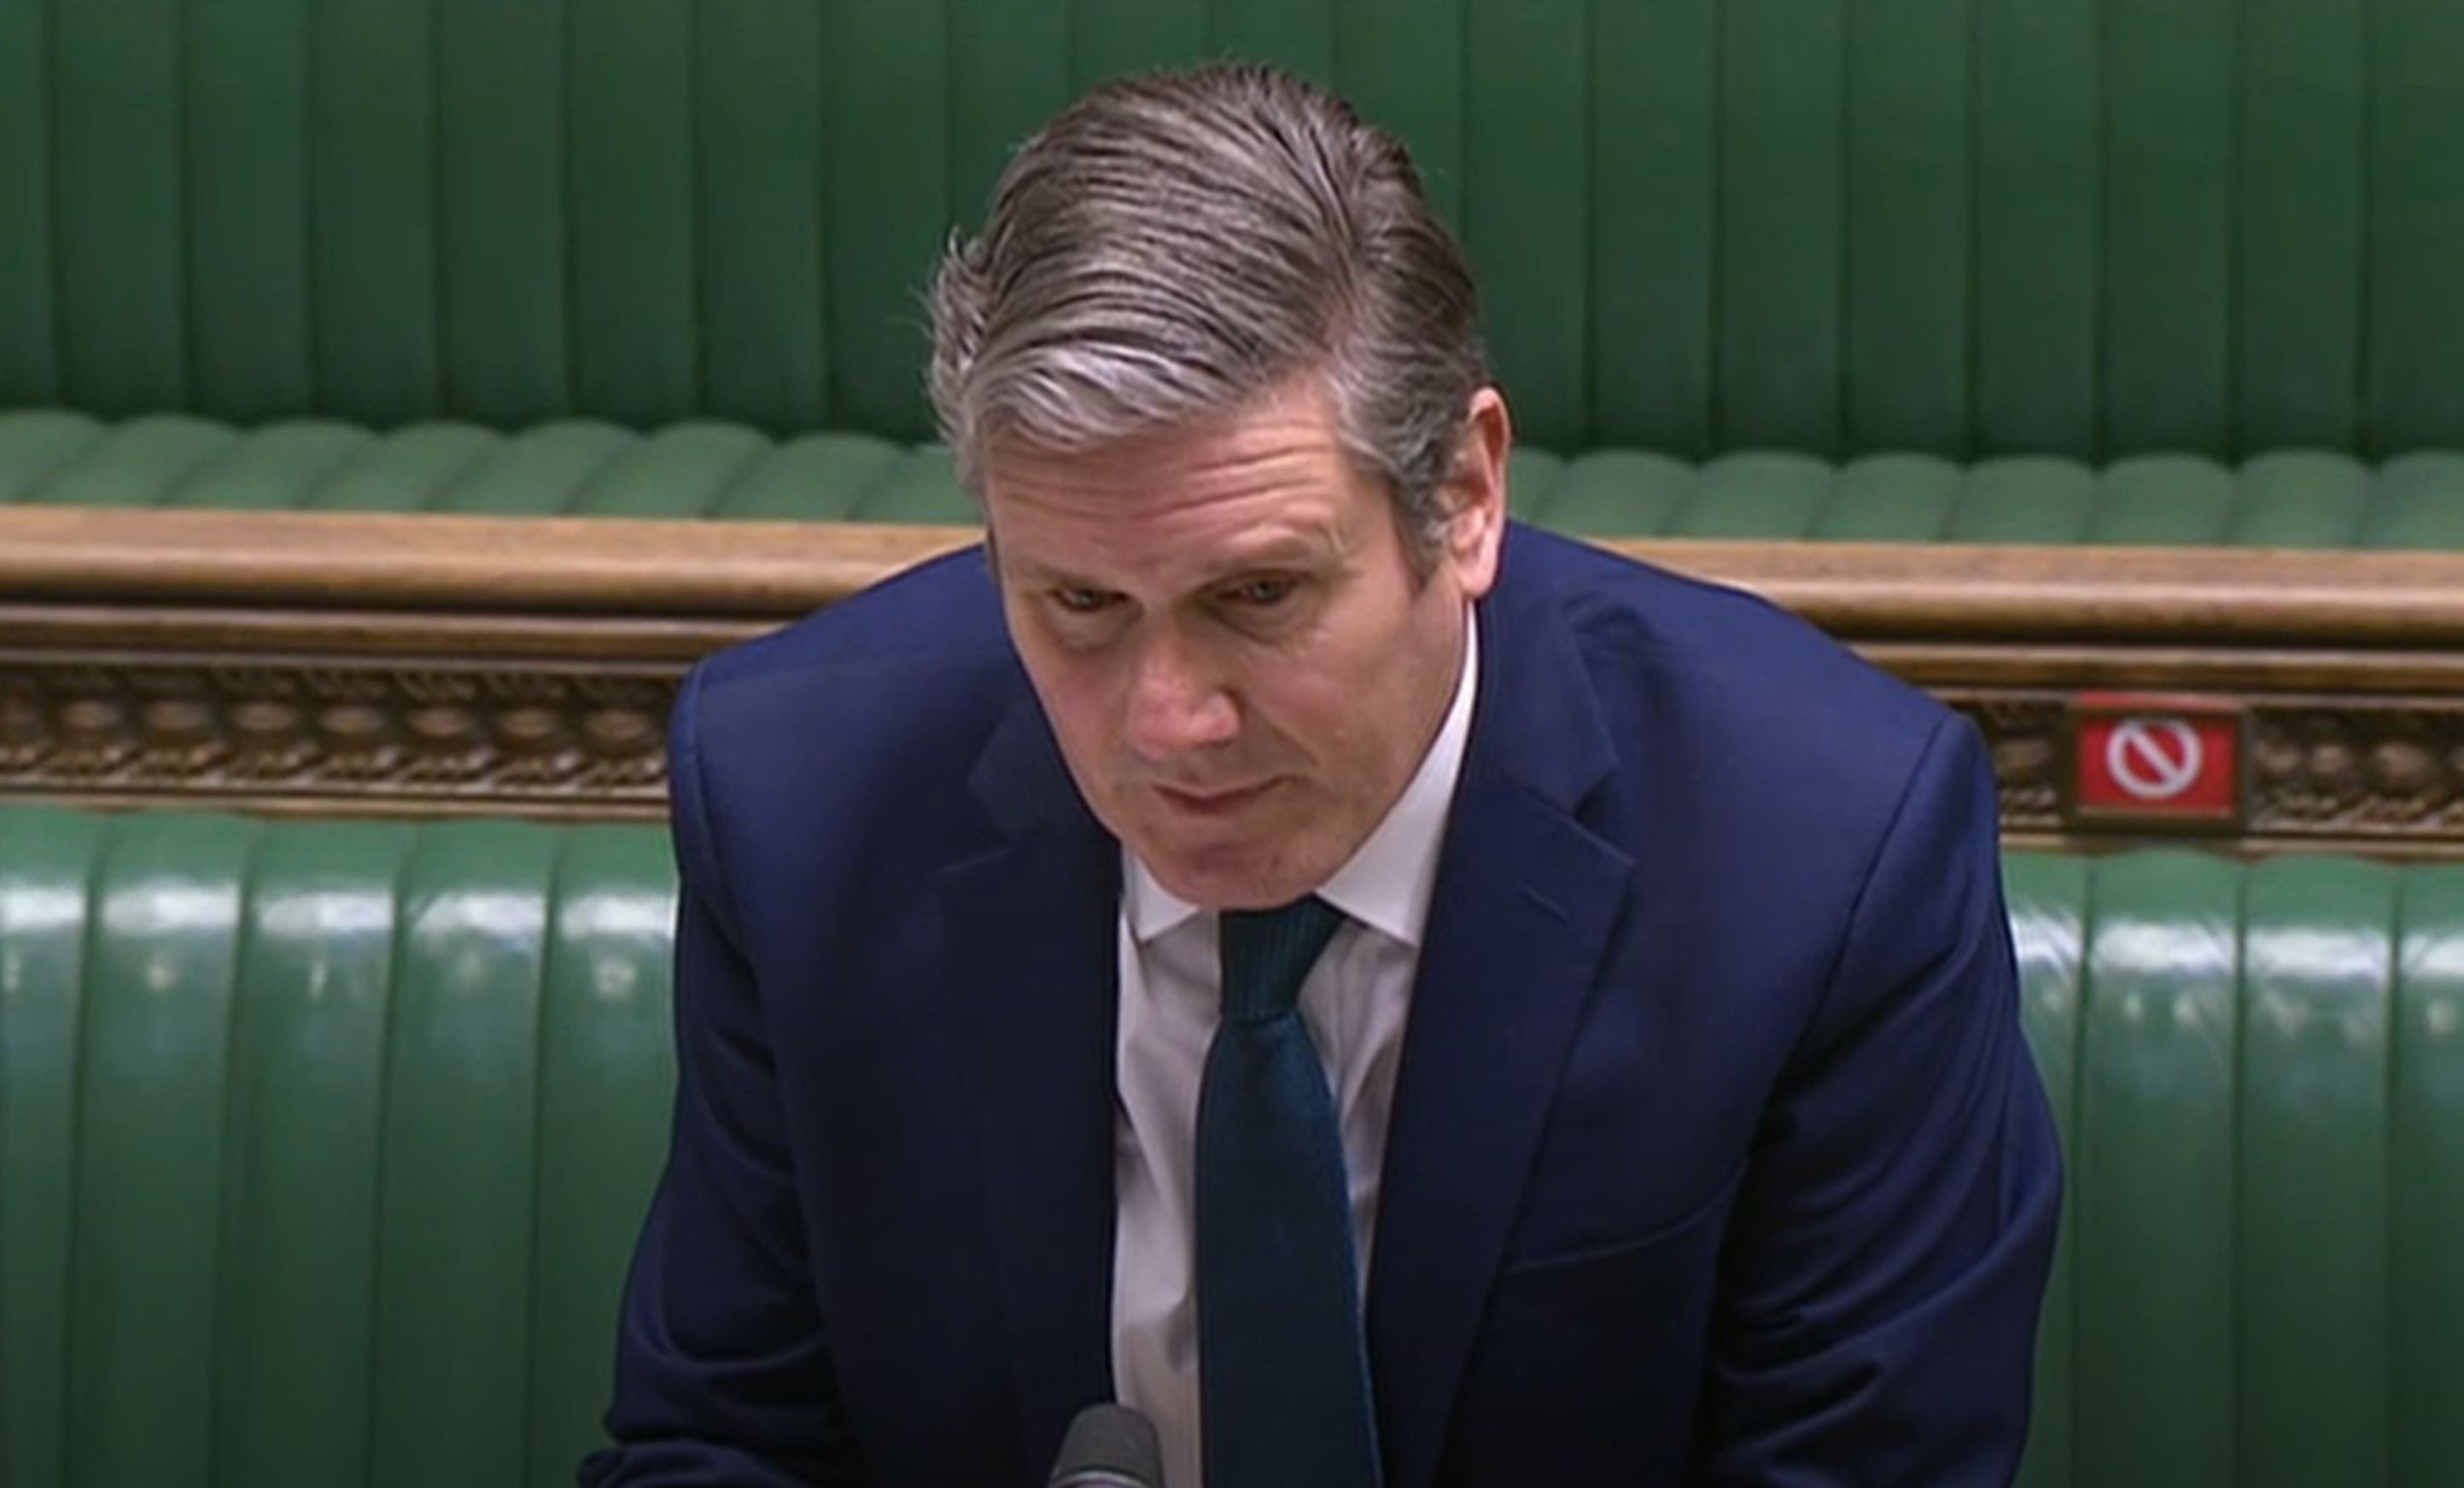 Keir Starmer brought his drum to PMQs again